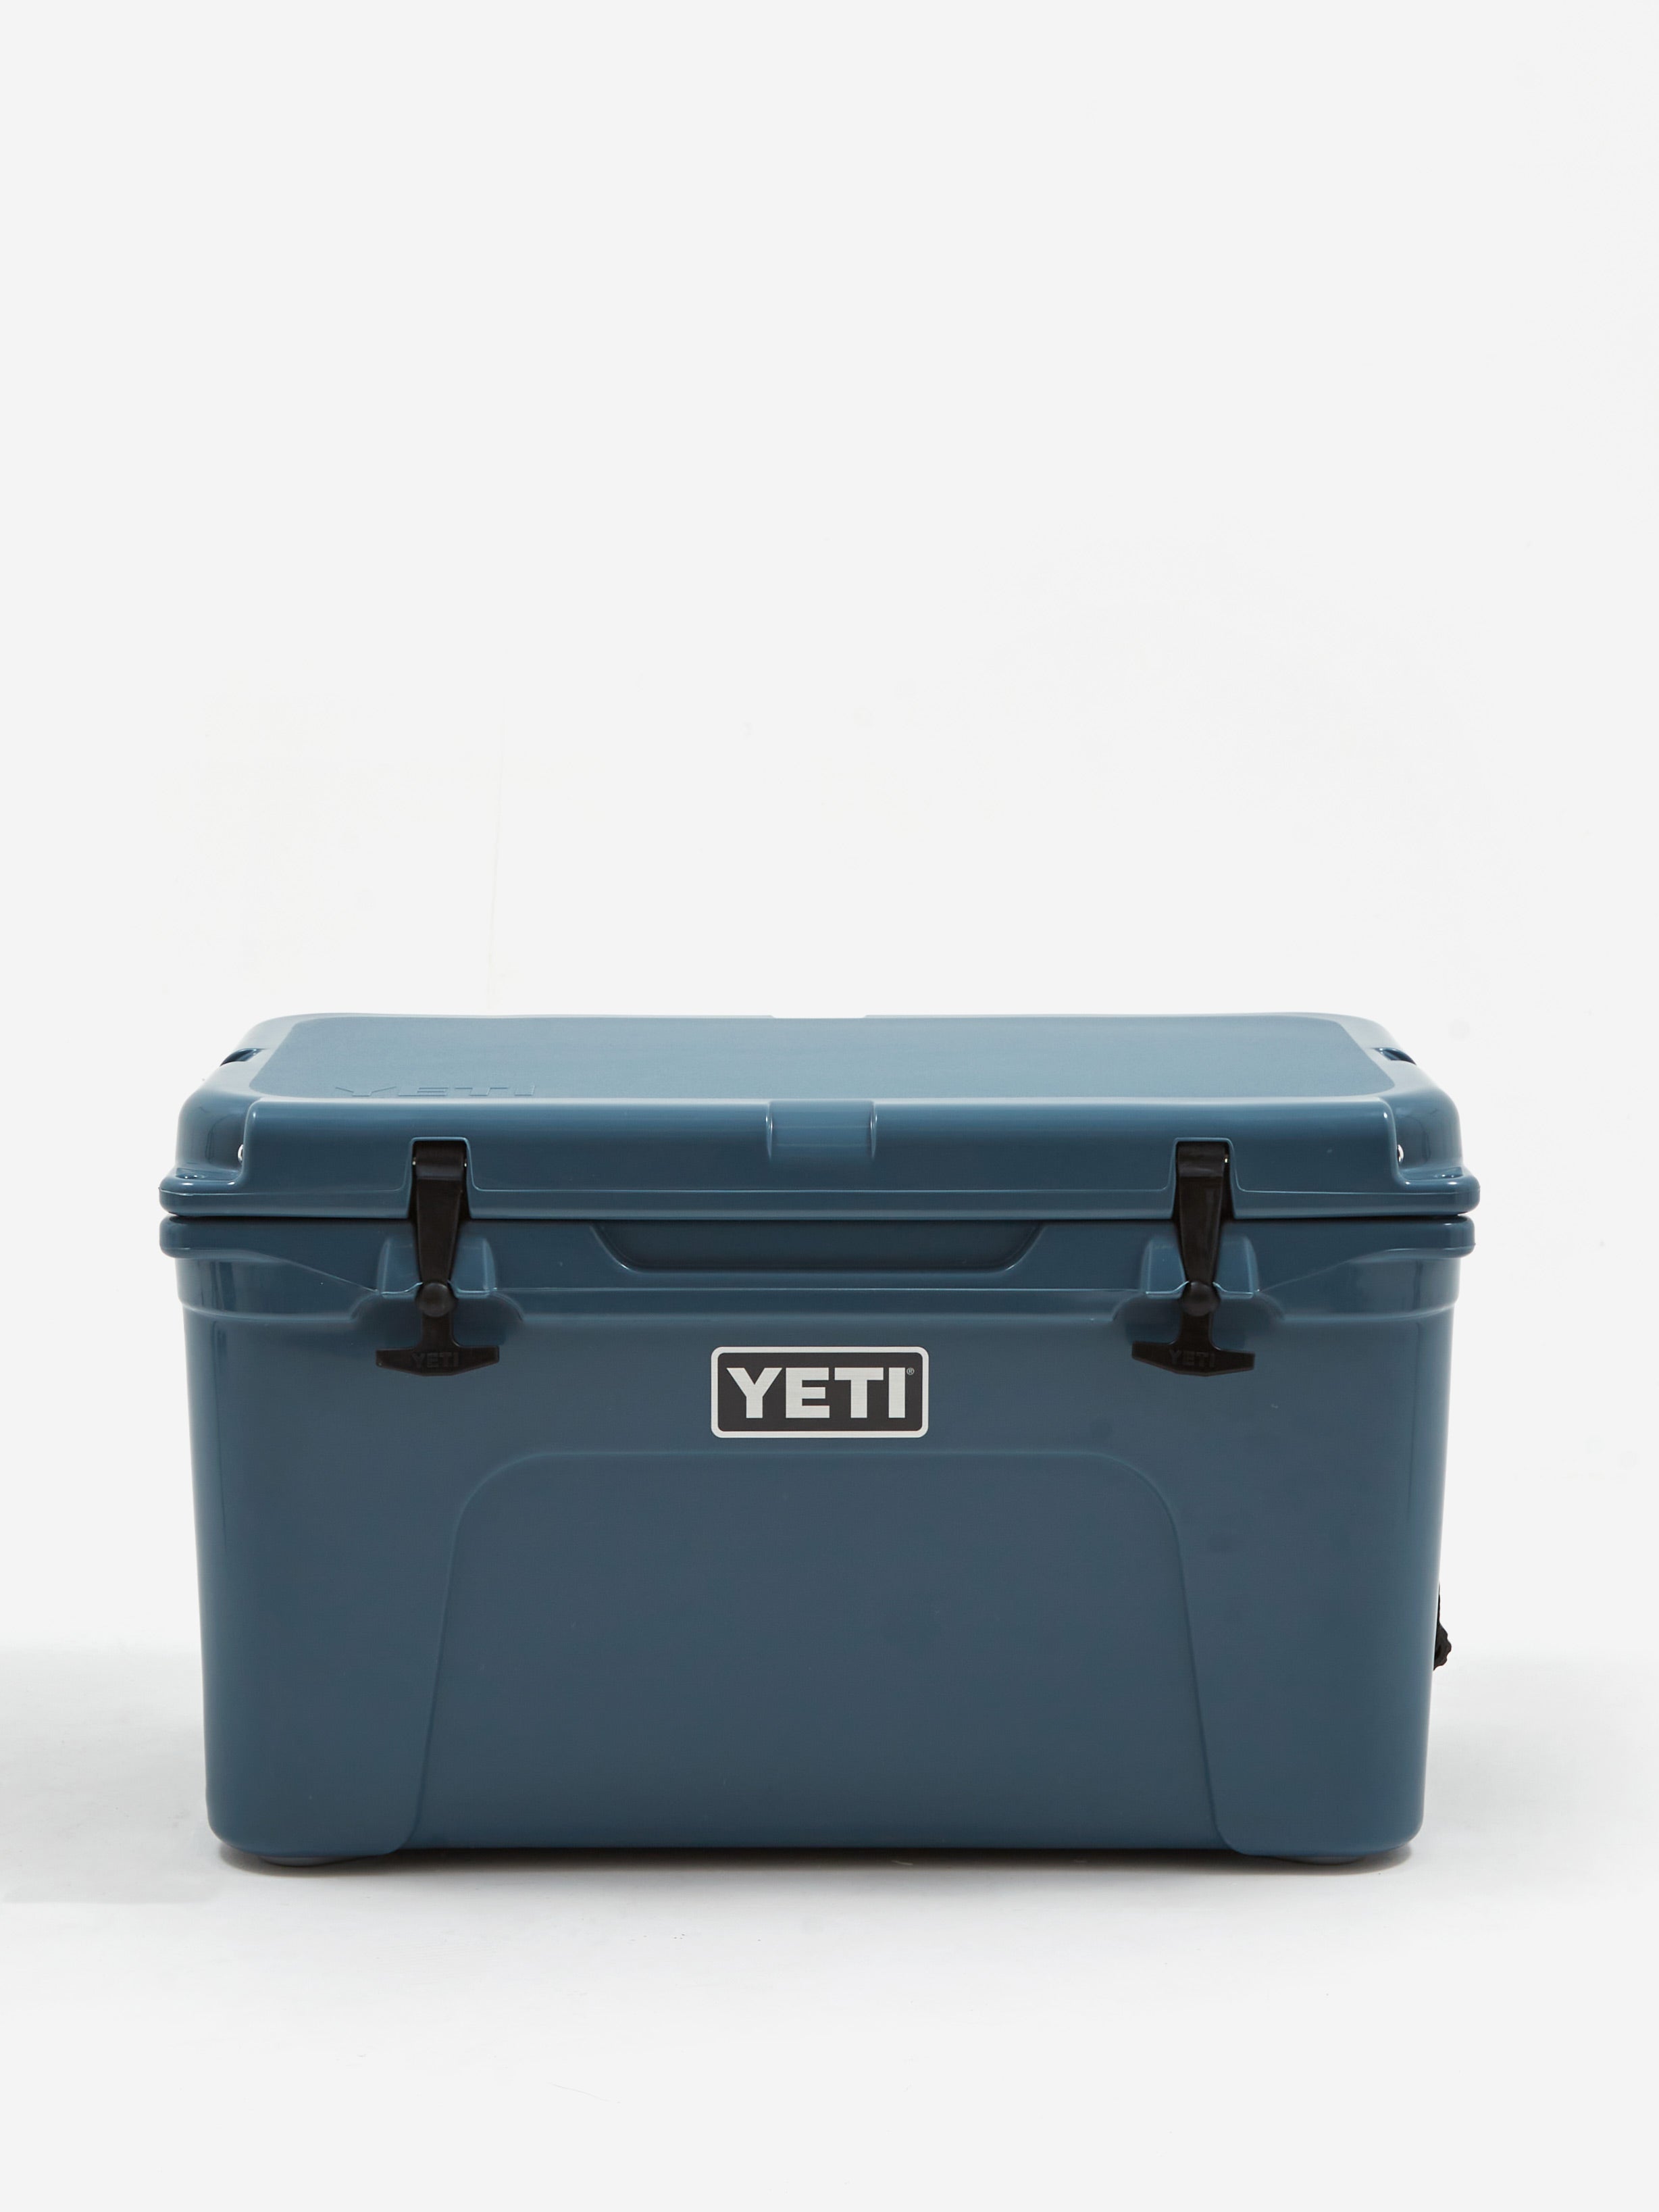 Nordic Blue & River Green : r/YetiCoolers